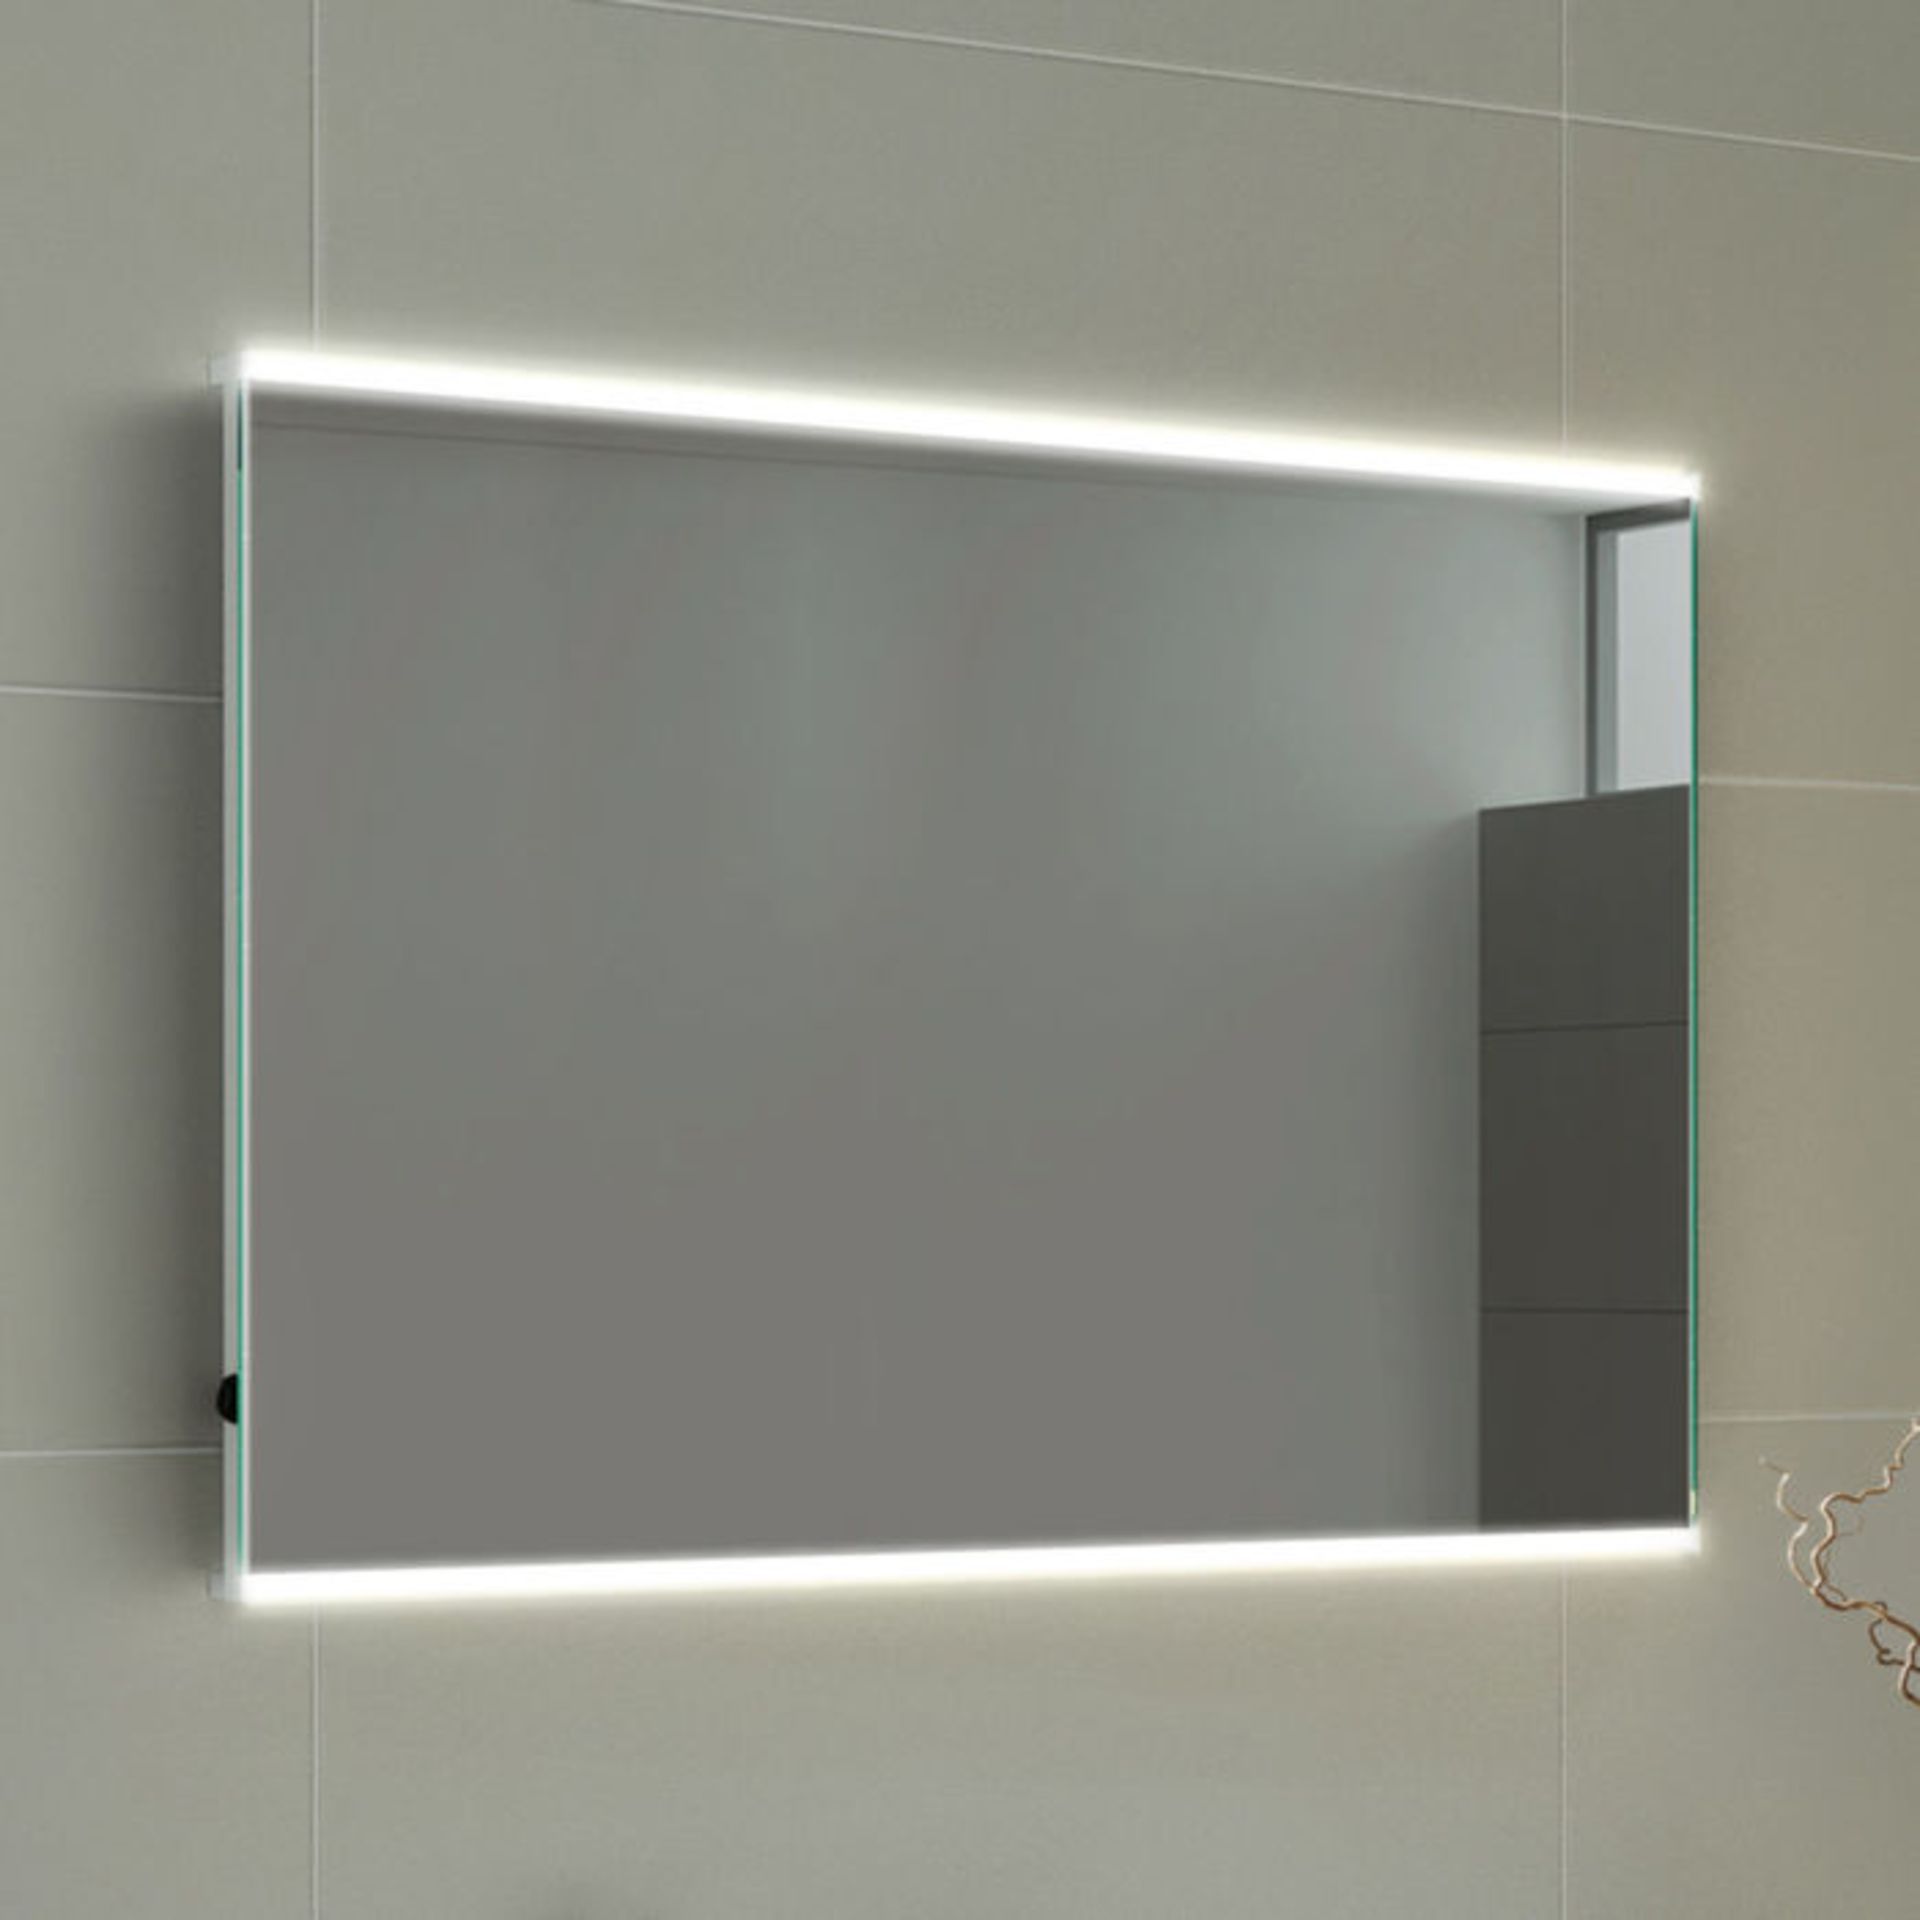 (LP83) 500x700mm Denver Illuminated LED Mirror - Battery Operated. RRP £119.99. Energy saving - Image 2 of 6